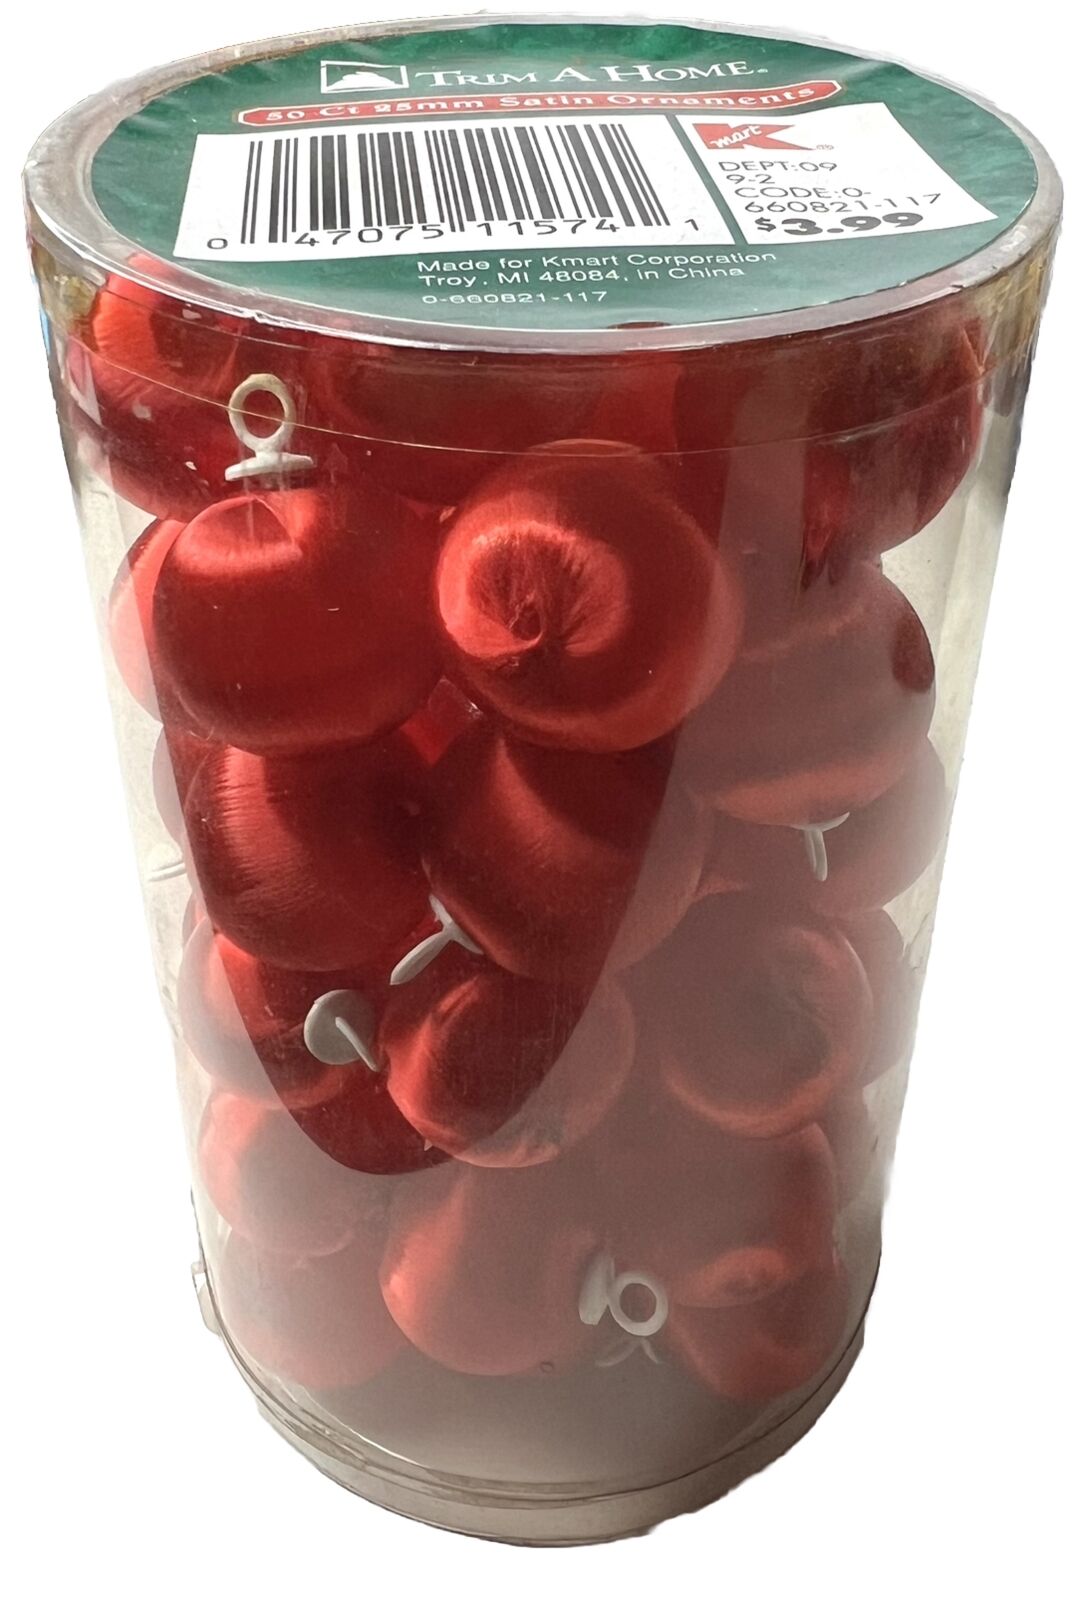 VTG Red Spun Satin 25 mm Ornaments Lot Of 50 By Trim A Home For Kmart NEW IN PKG